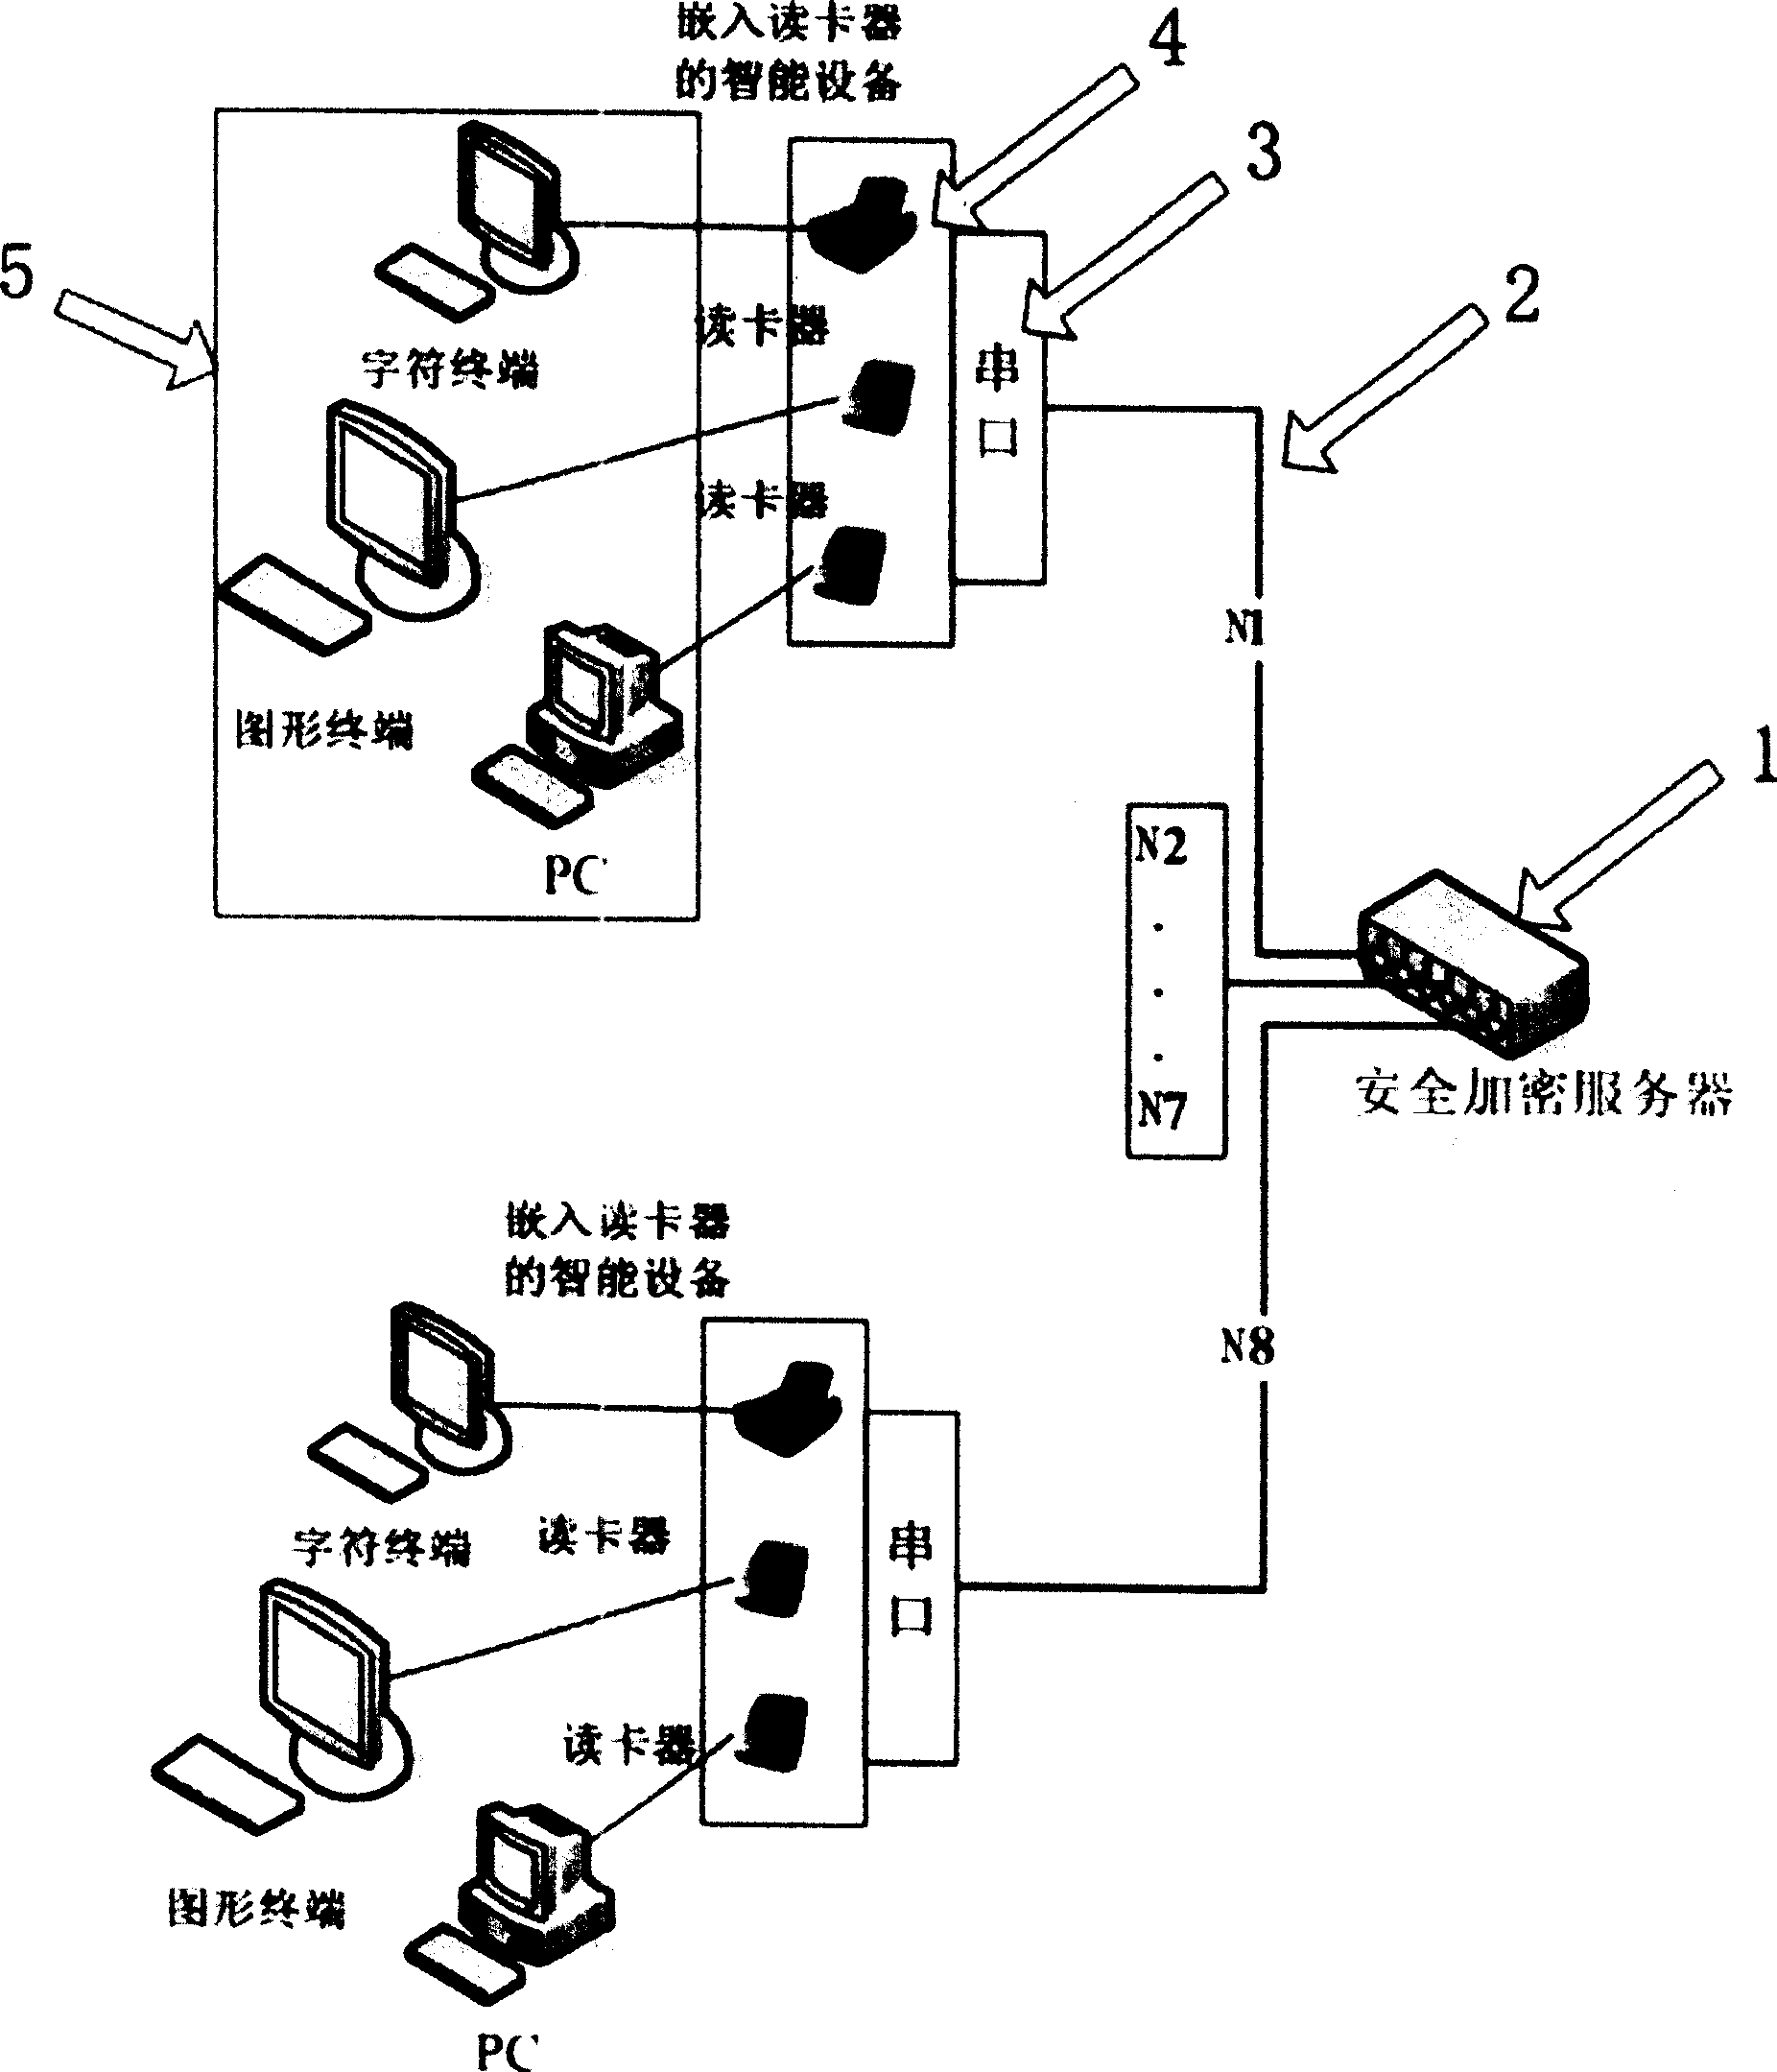 Network reading control method of second generation resident identification card